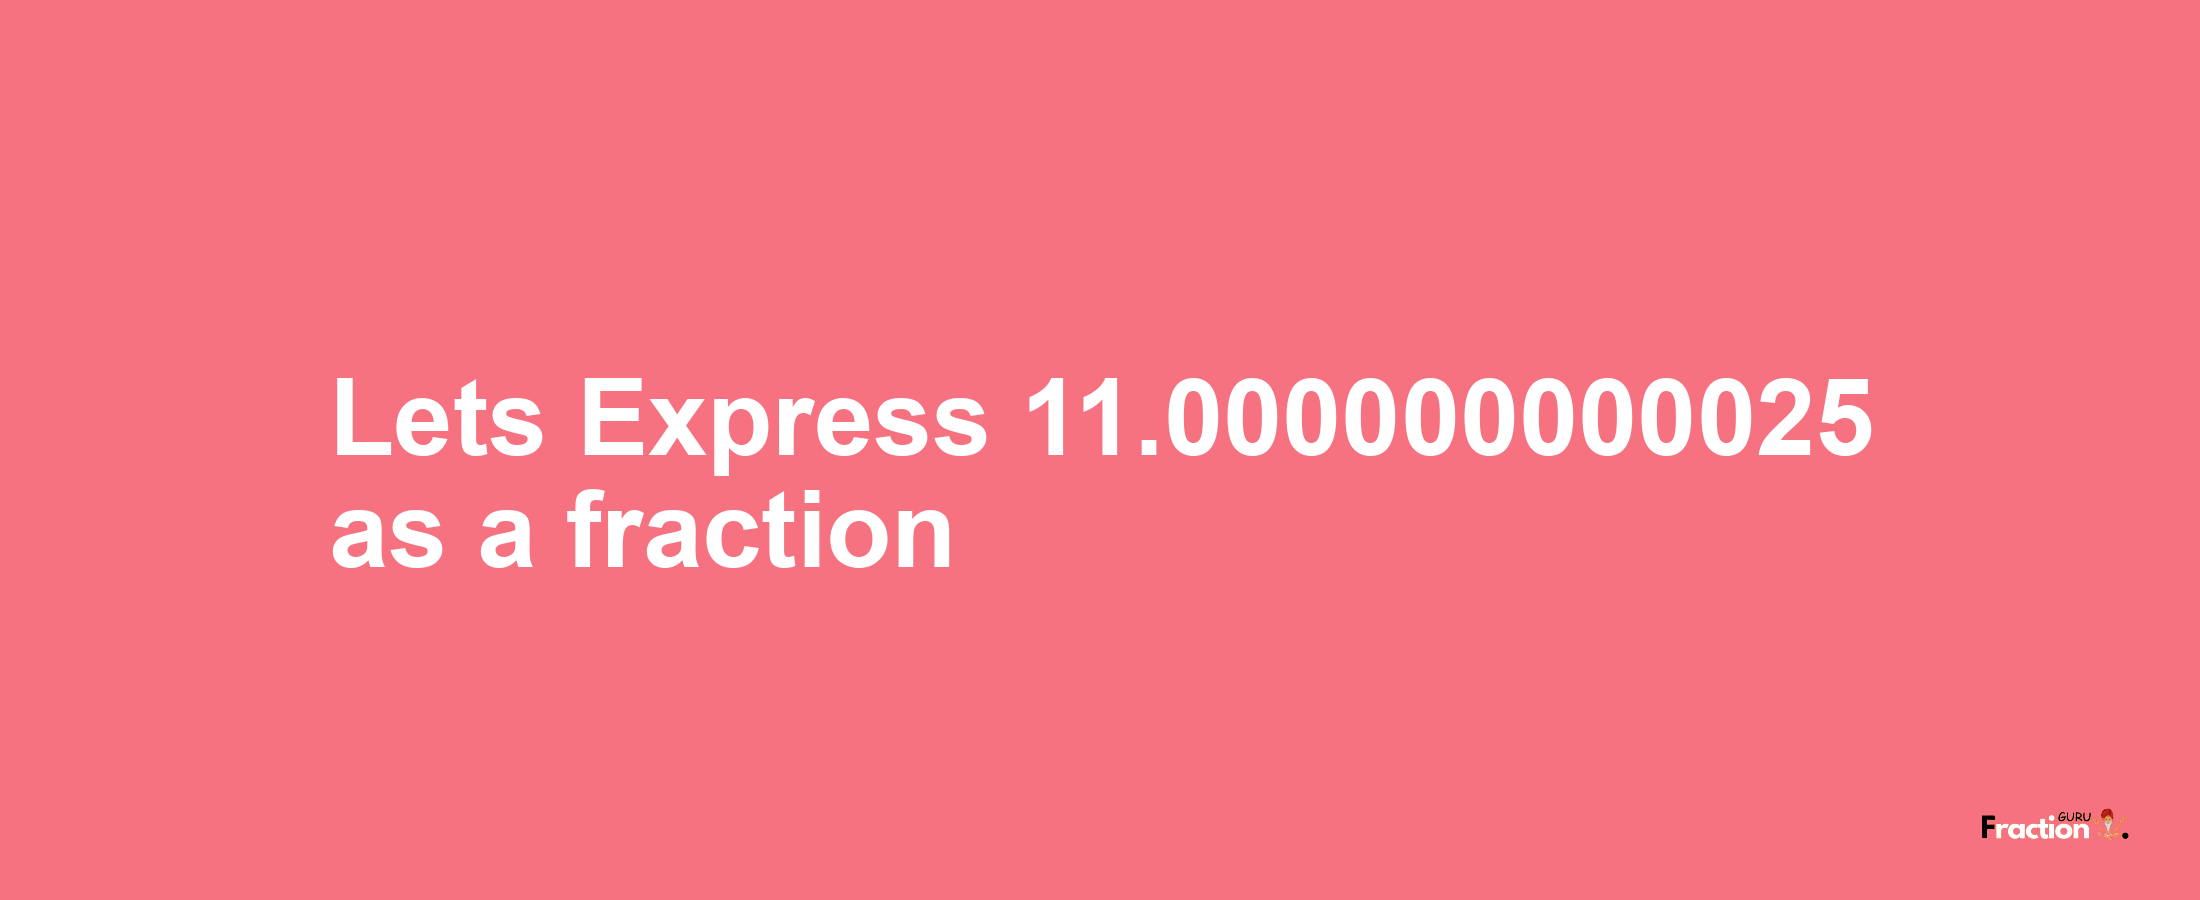 Lets Express 11.000000000025 as afraction